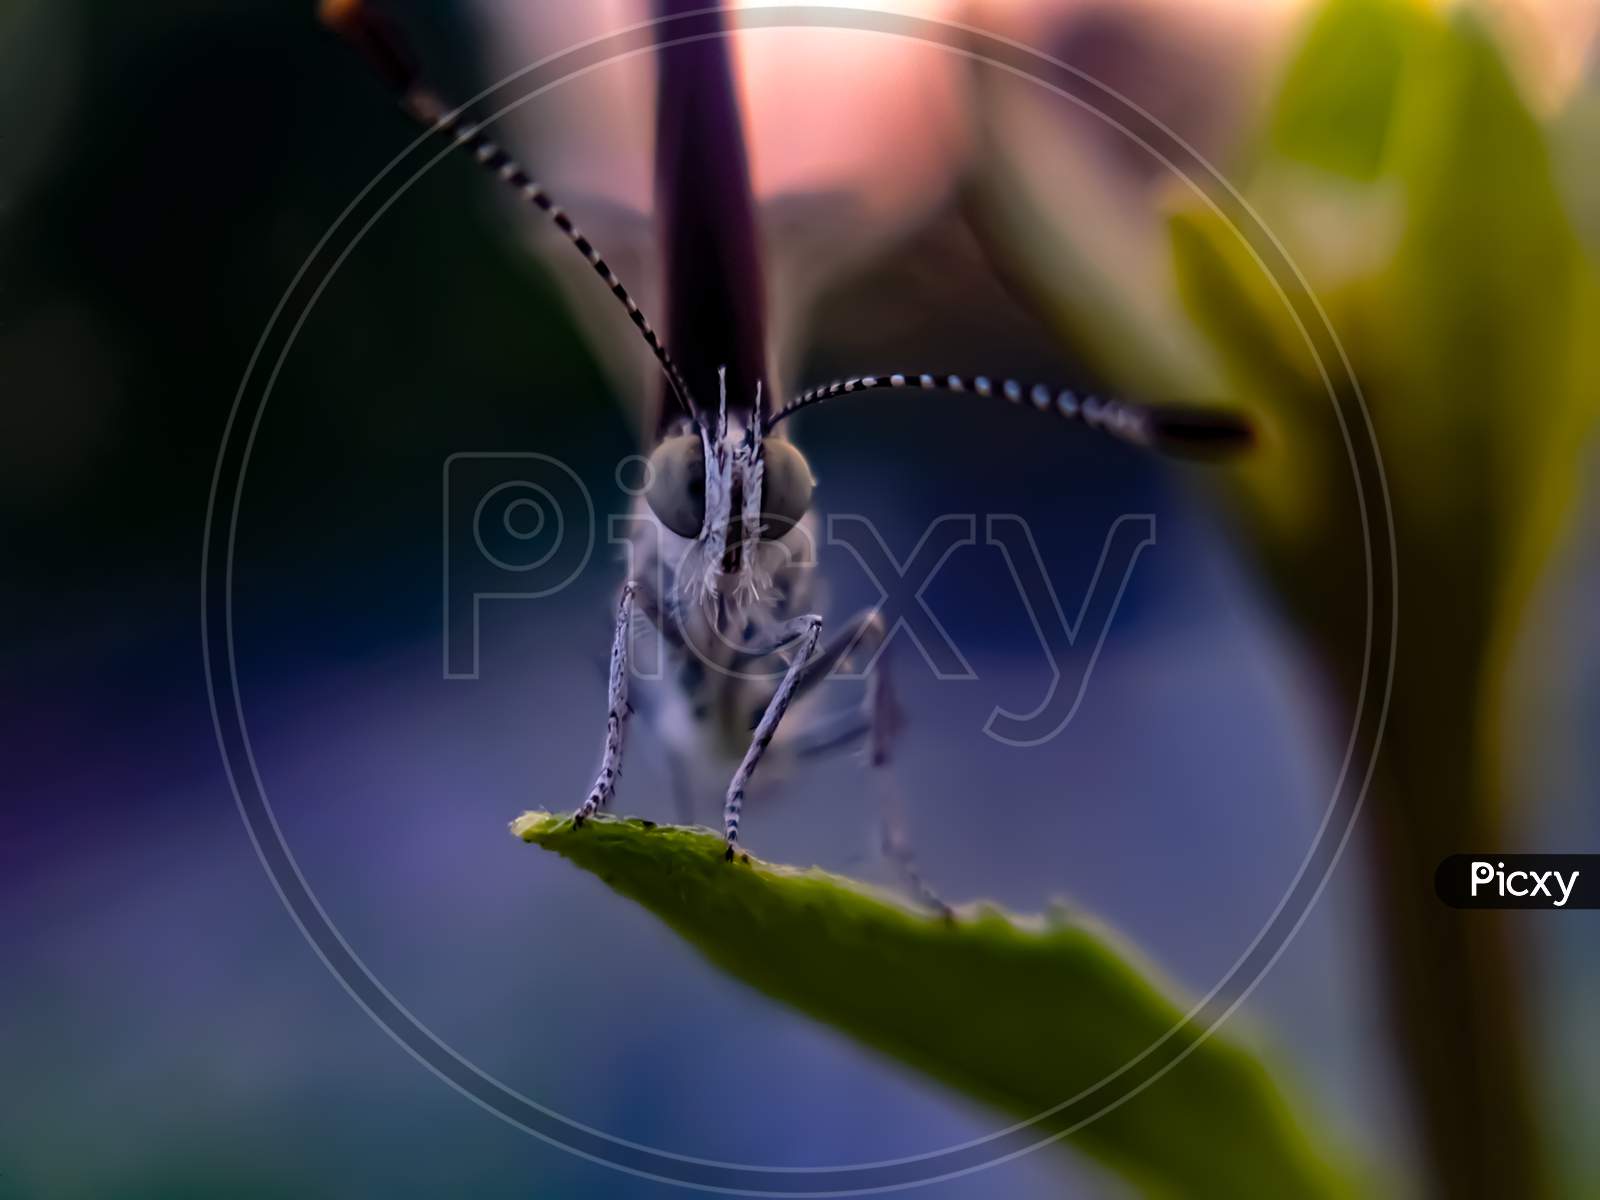 Zizula hylax species butterfly on leaf Tiny grass blue insect garden butterfly